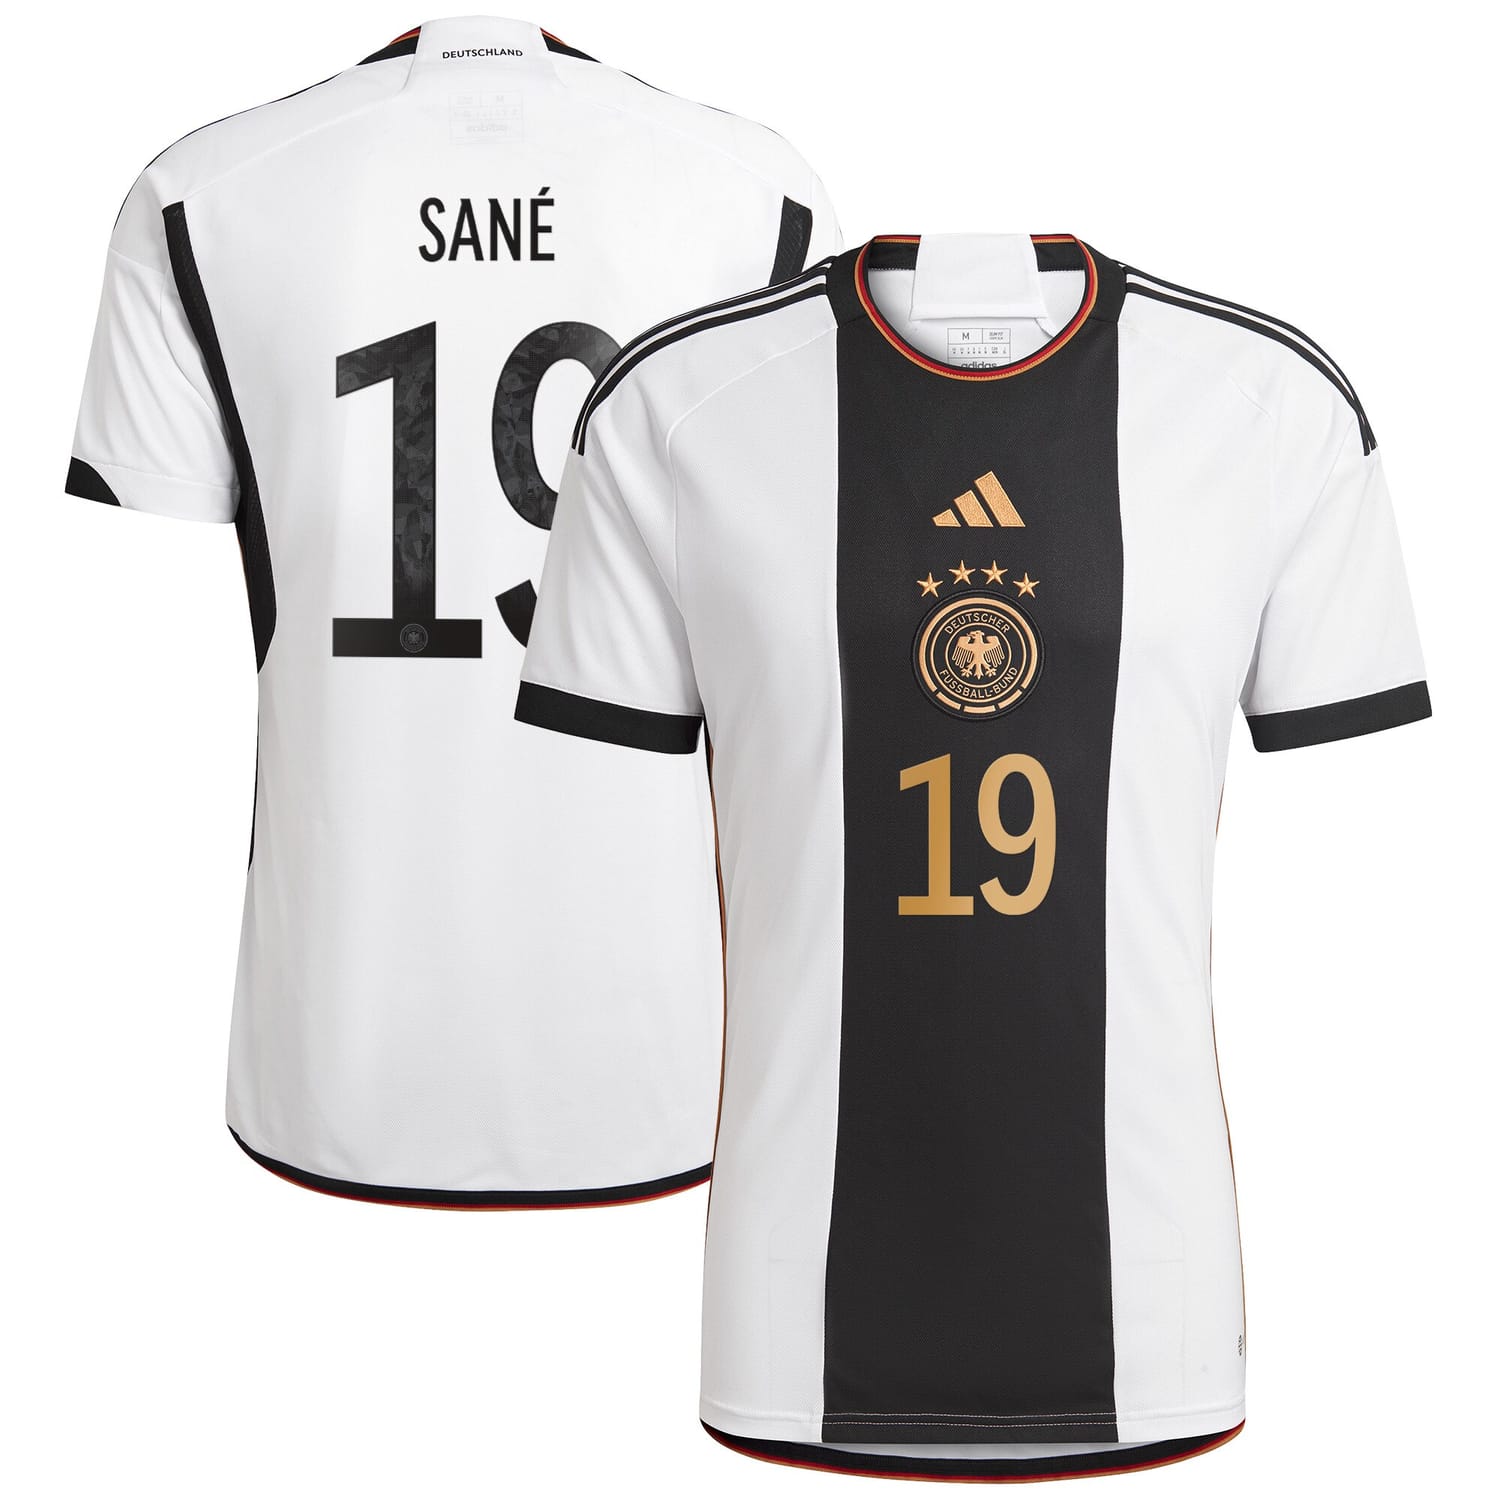 Germany National Team Home Jersey Shirt player Leroy Sané 19 printing for Men